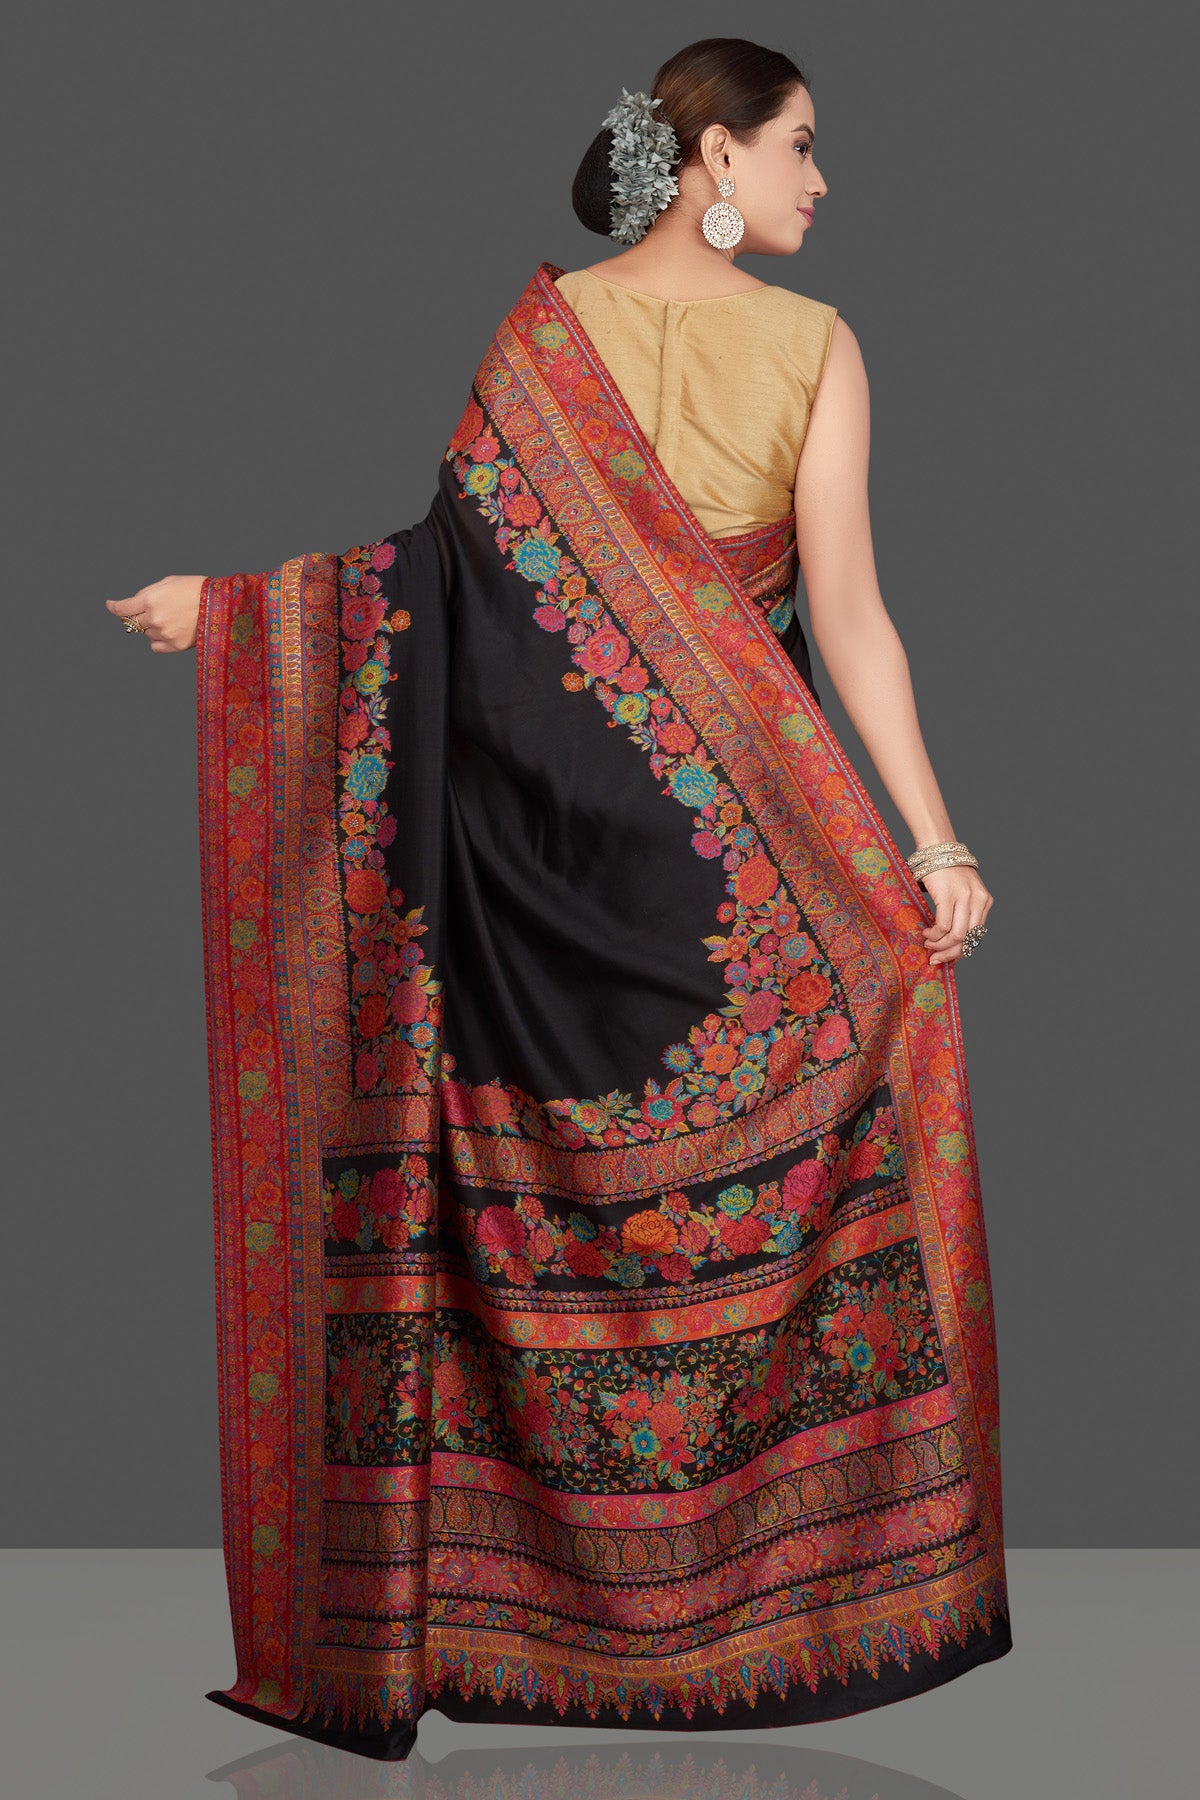 Buy stunning black tussar muga silk saree online in USA with Kani embroidery border. Get ready for festive occasions and weddings in tasteful designer sarees, Banarasi sarees, handwoven sarees from Pure Elegance Indian clothing store in USA.-back